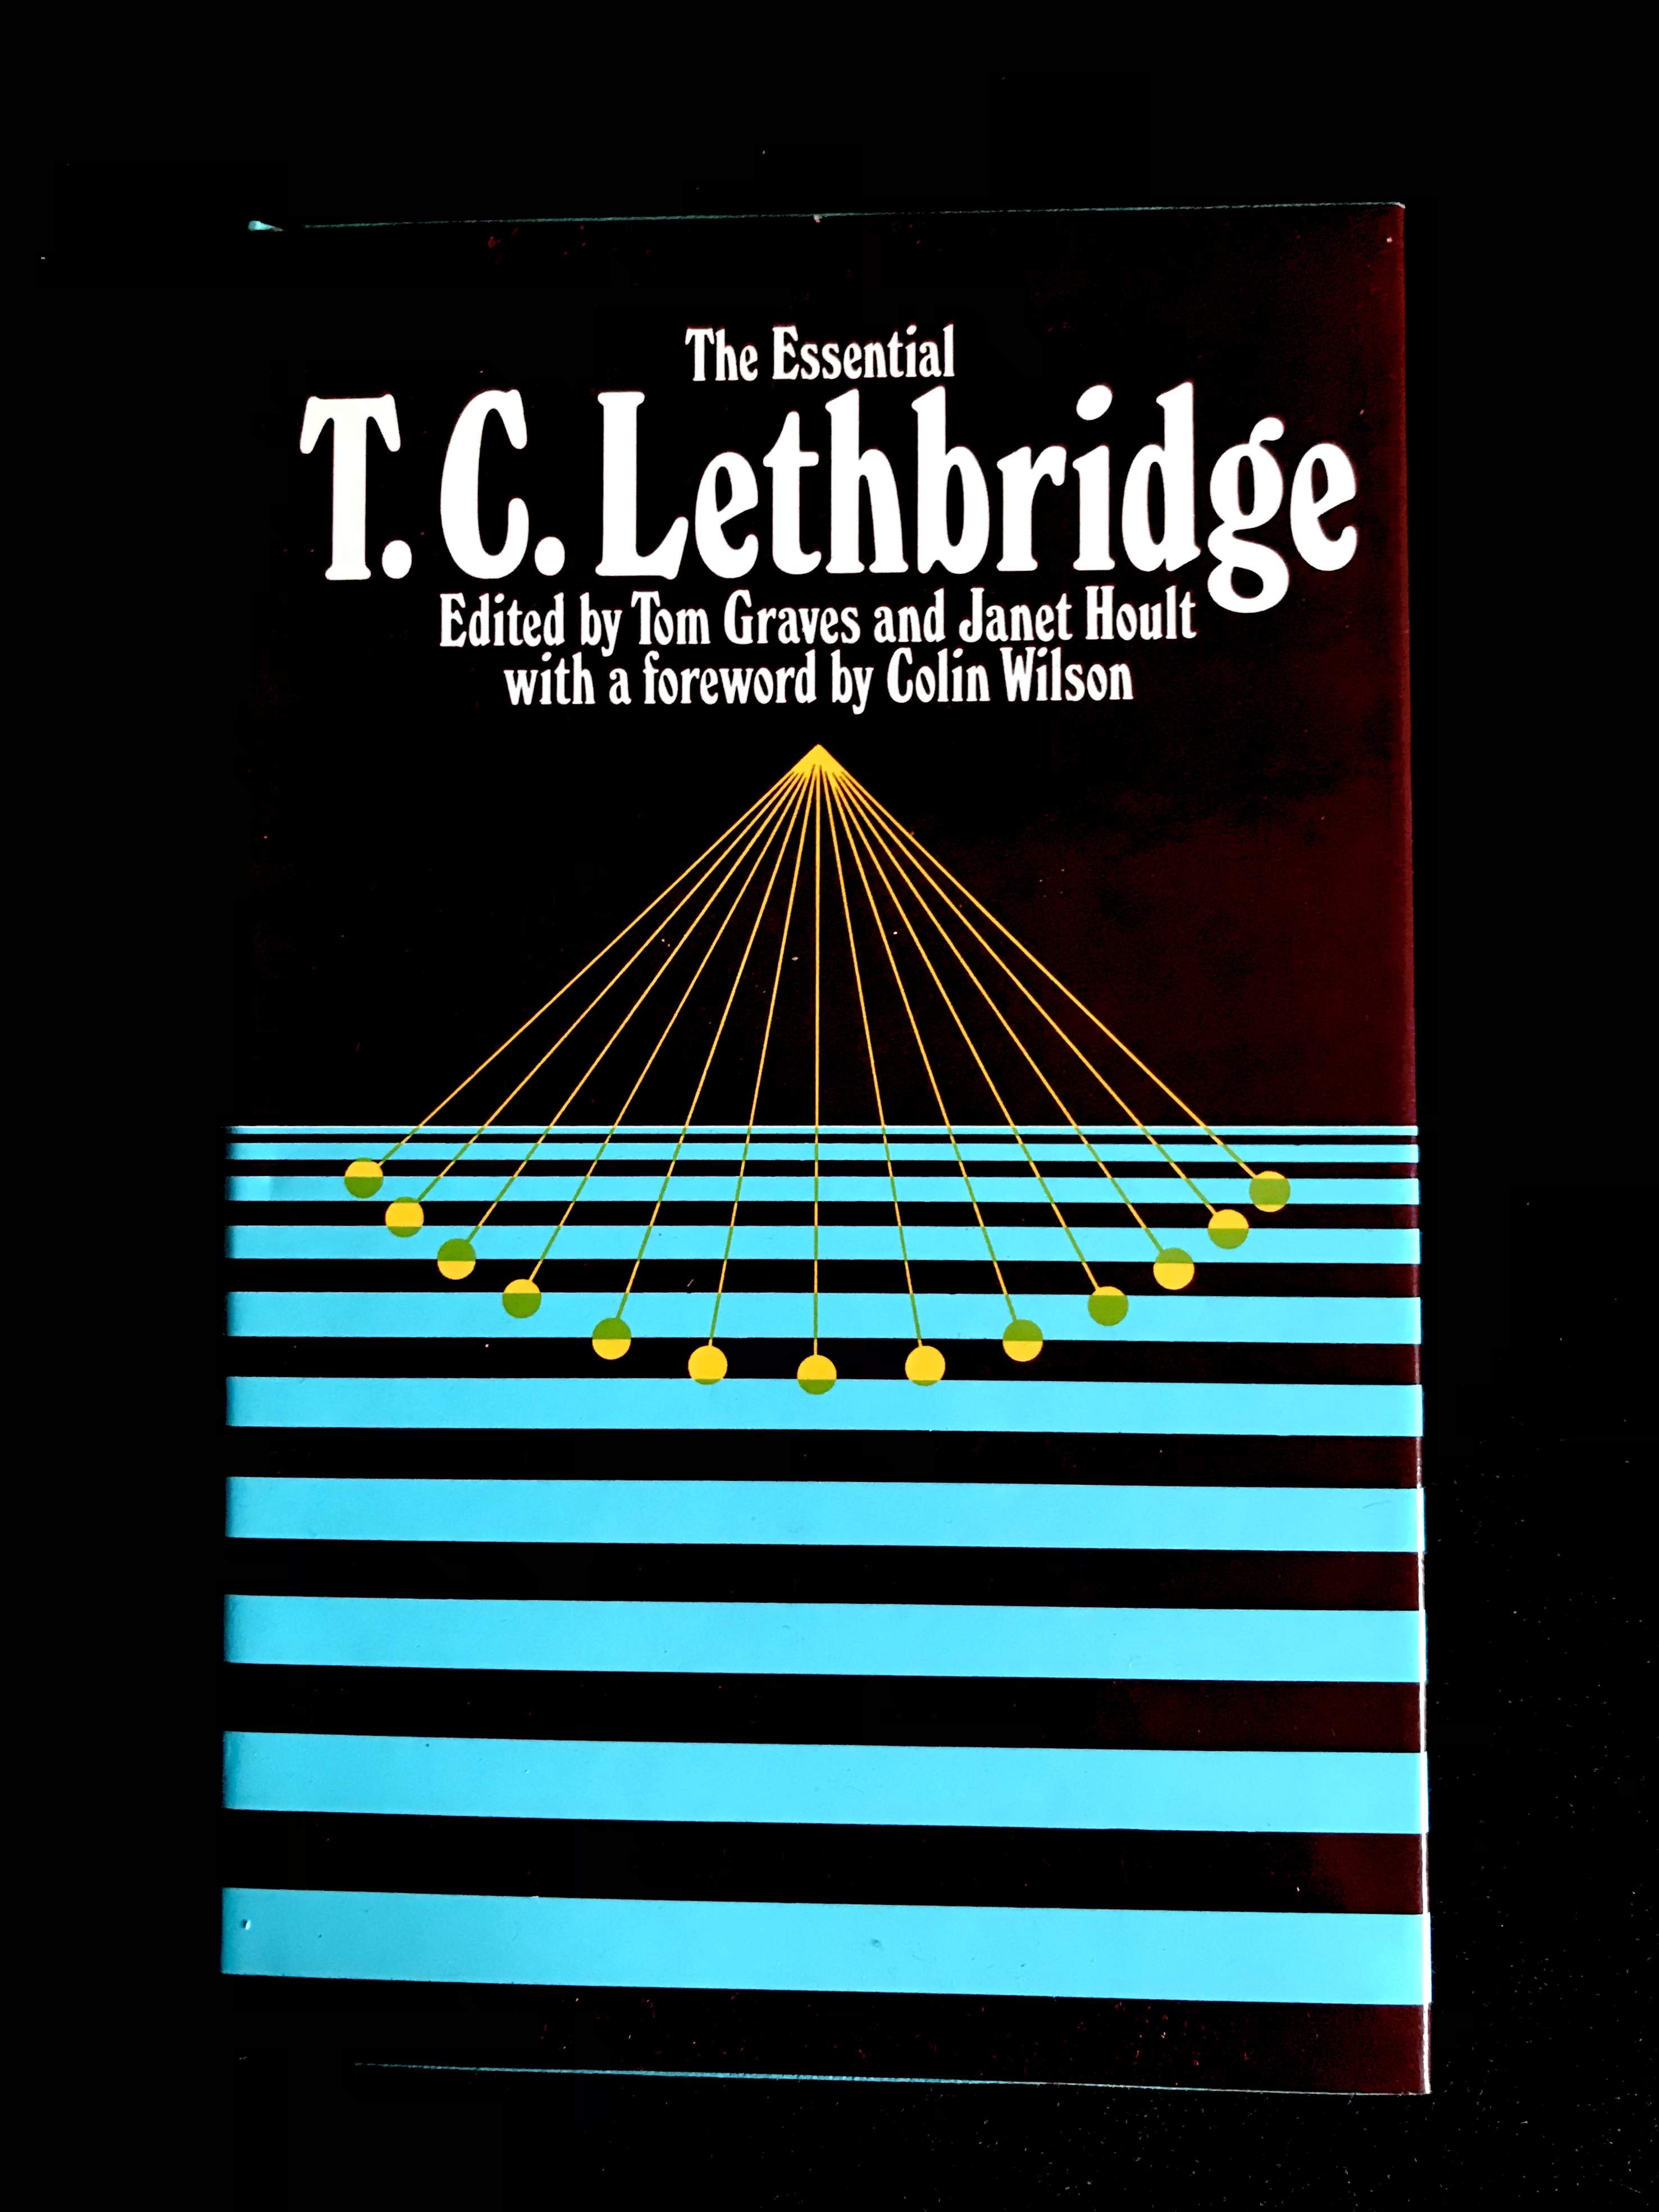 The Essential T. C. Lethbridge Edited by Tom Graves & Janet Hoult